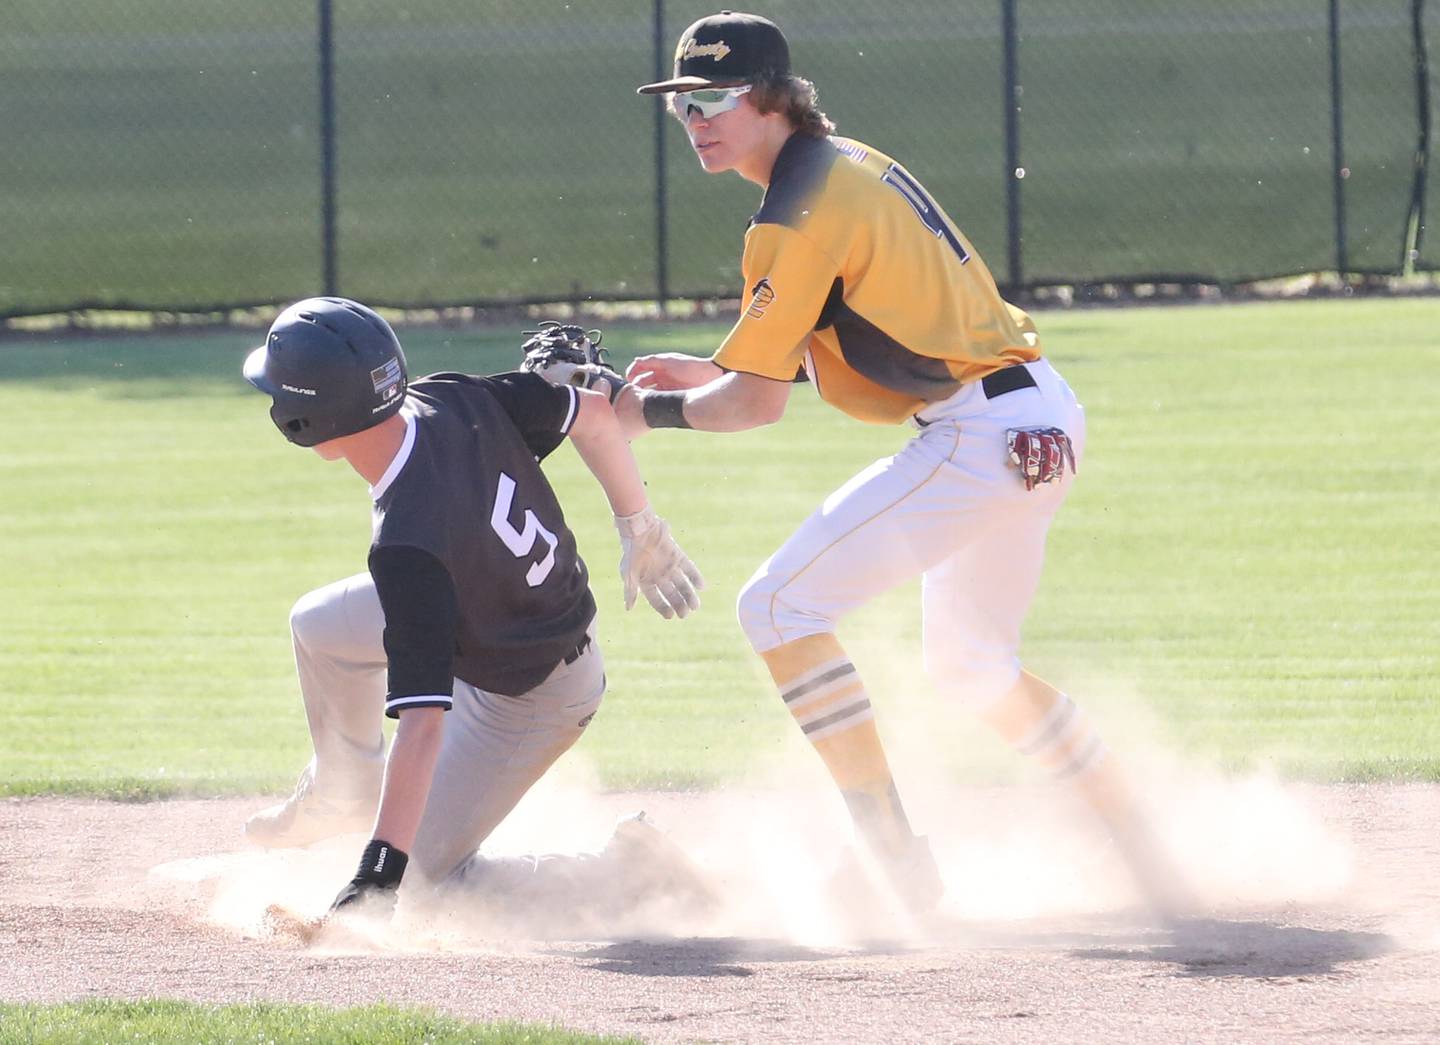 Putnam County's Blake Billups (4) tags out Woodland/Flanagan-Cornell's Carter Ewing (5) at second base on Thursday, May 4, 2023, at Putnam County High School.